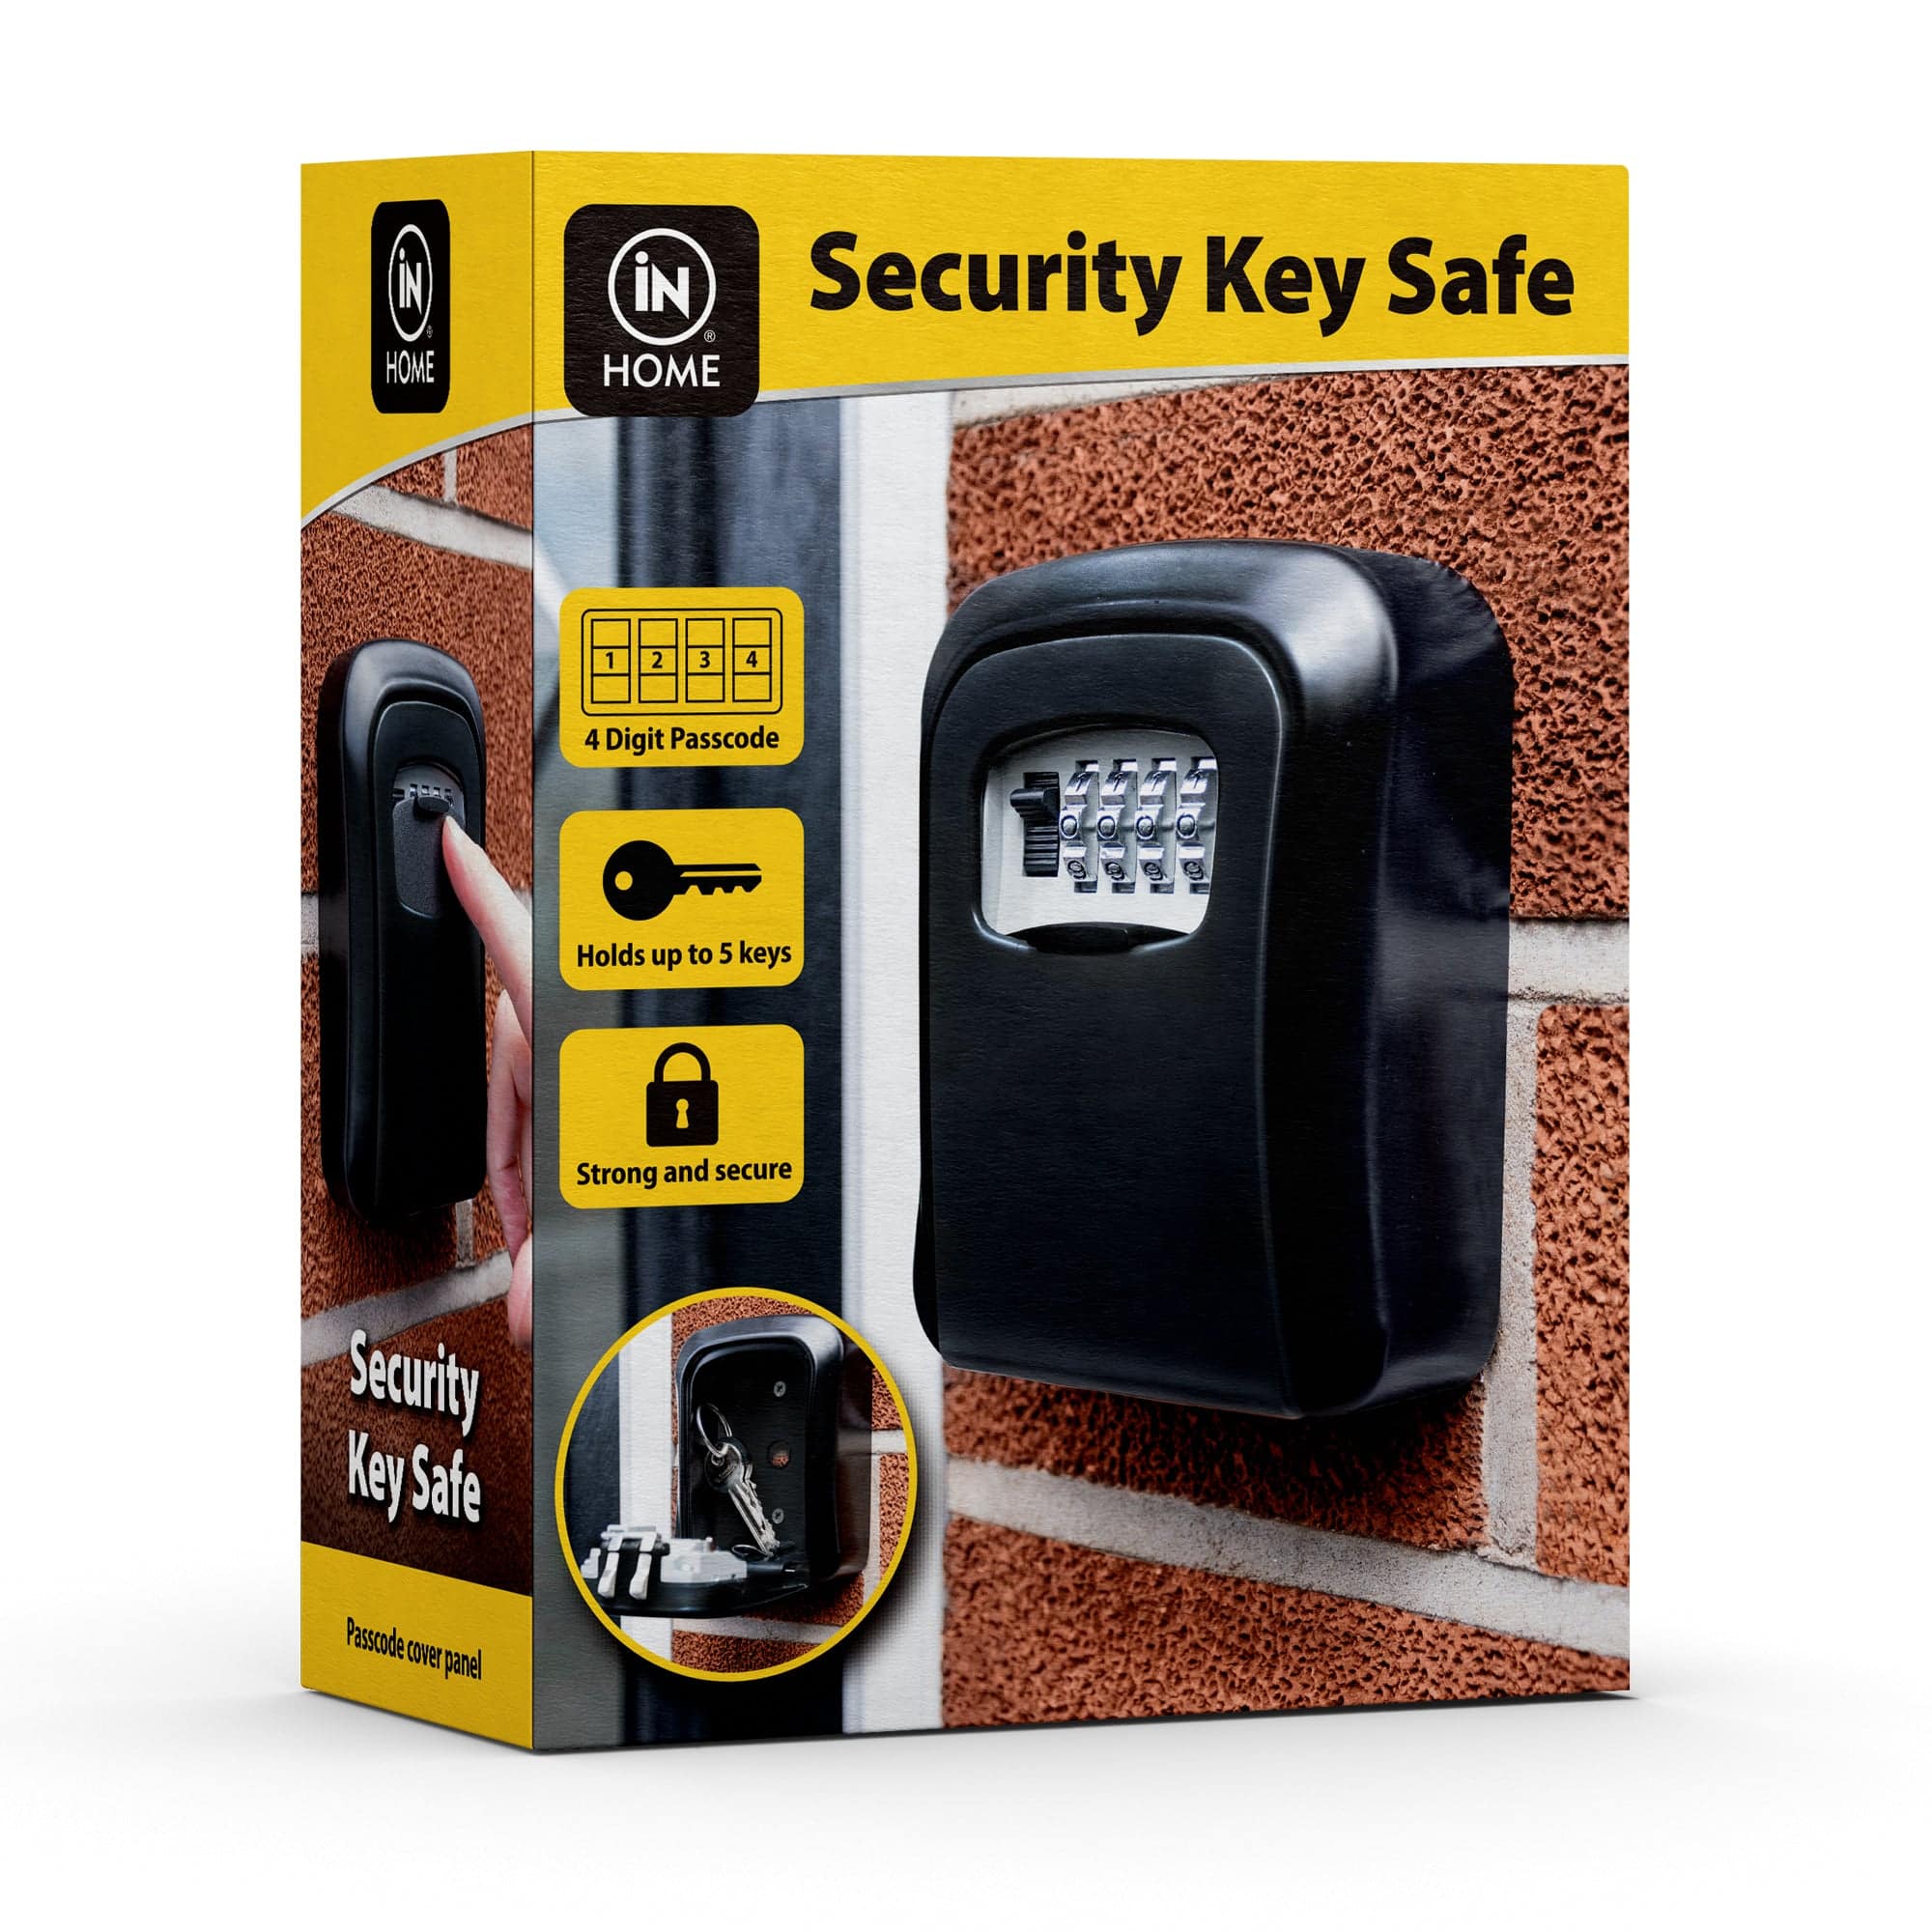 4 Digit Combination Security Key Safe - iN Home - DSL